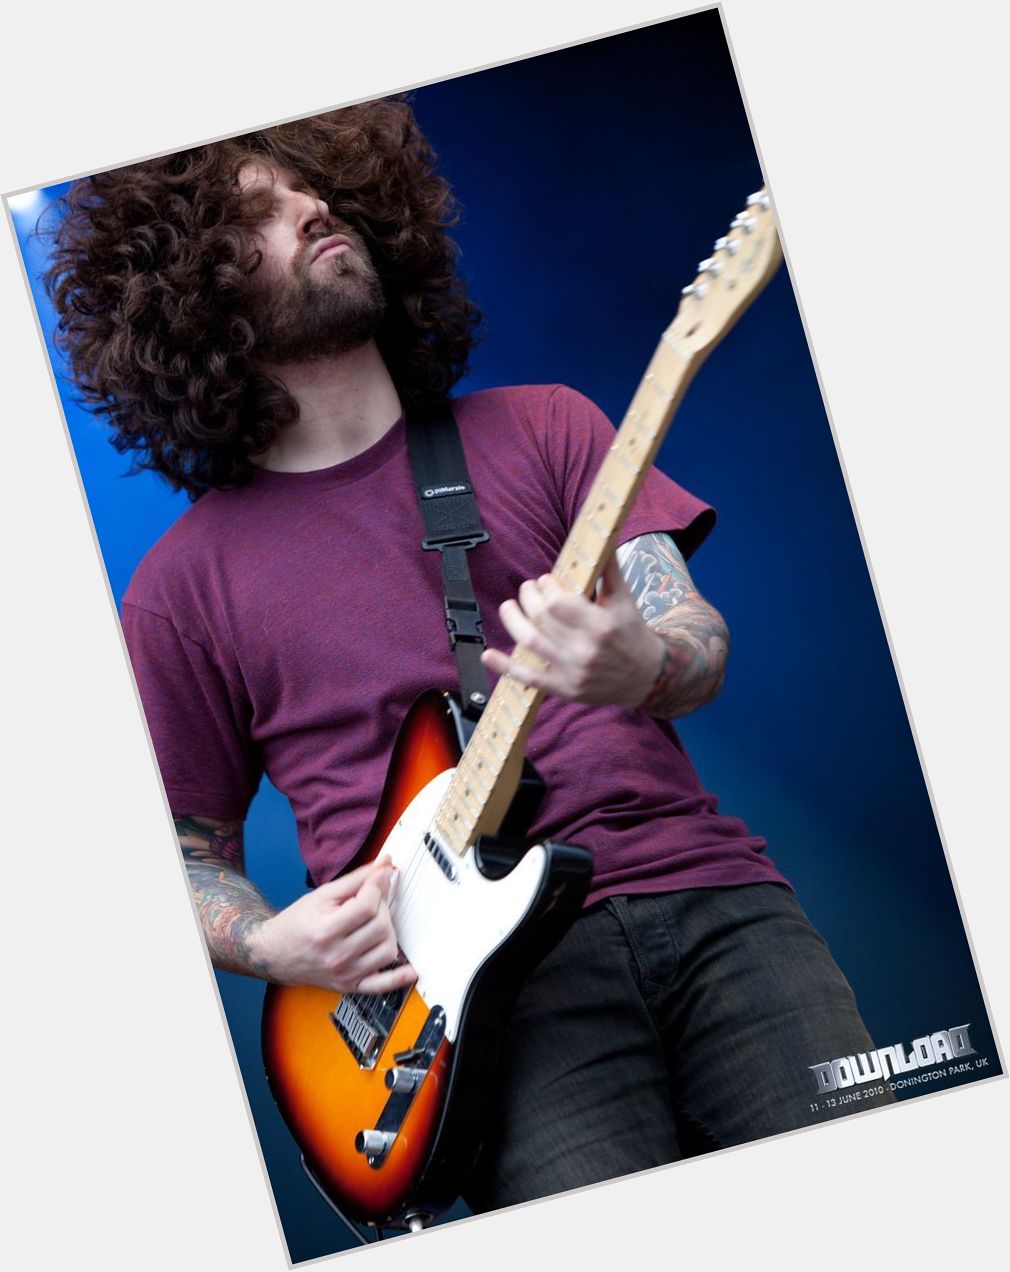  Happy Birthday to Joe Trohman, one of the coolest and most inspiring guitarists ever   